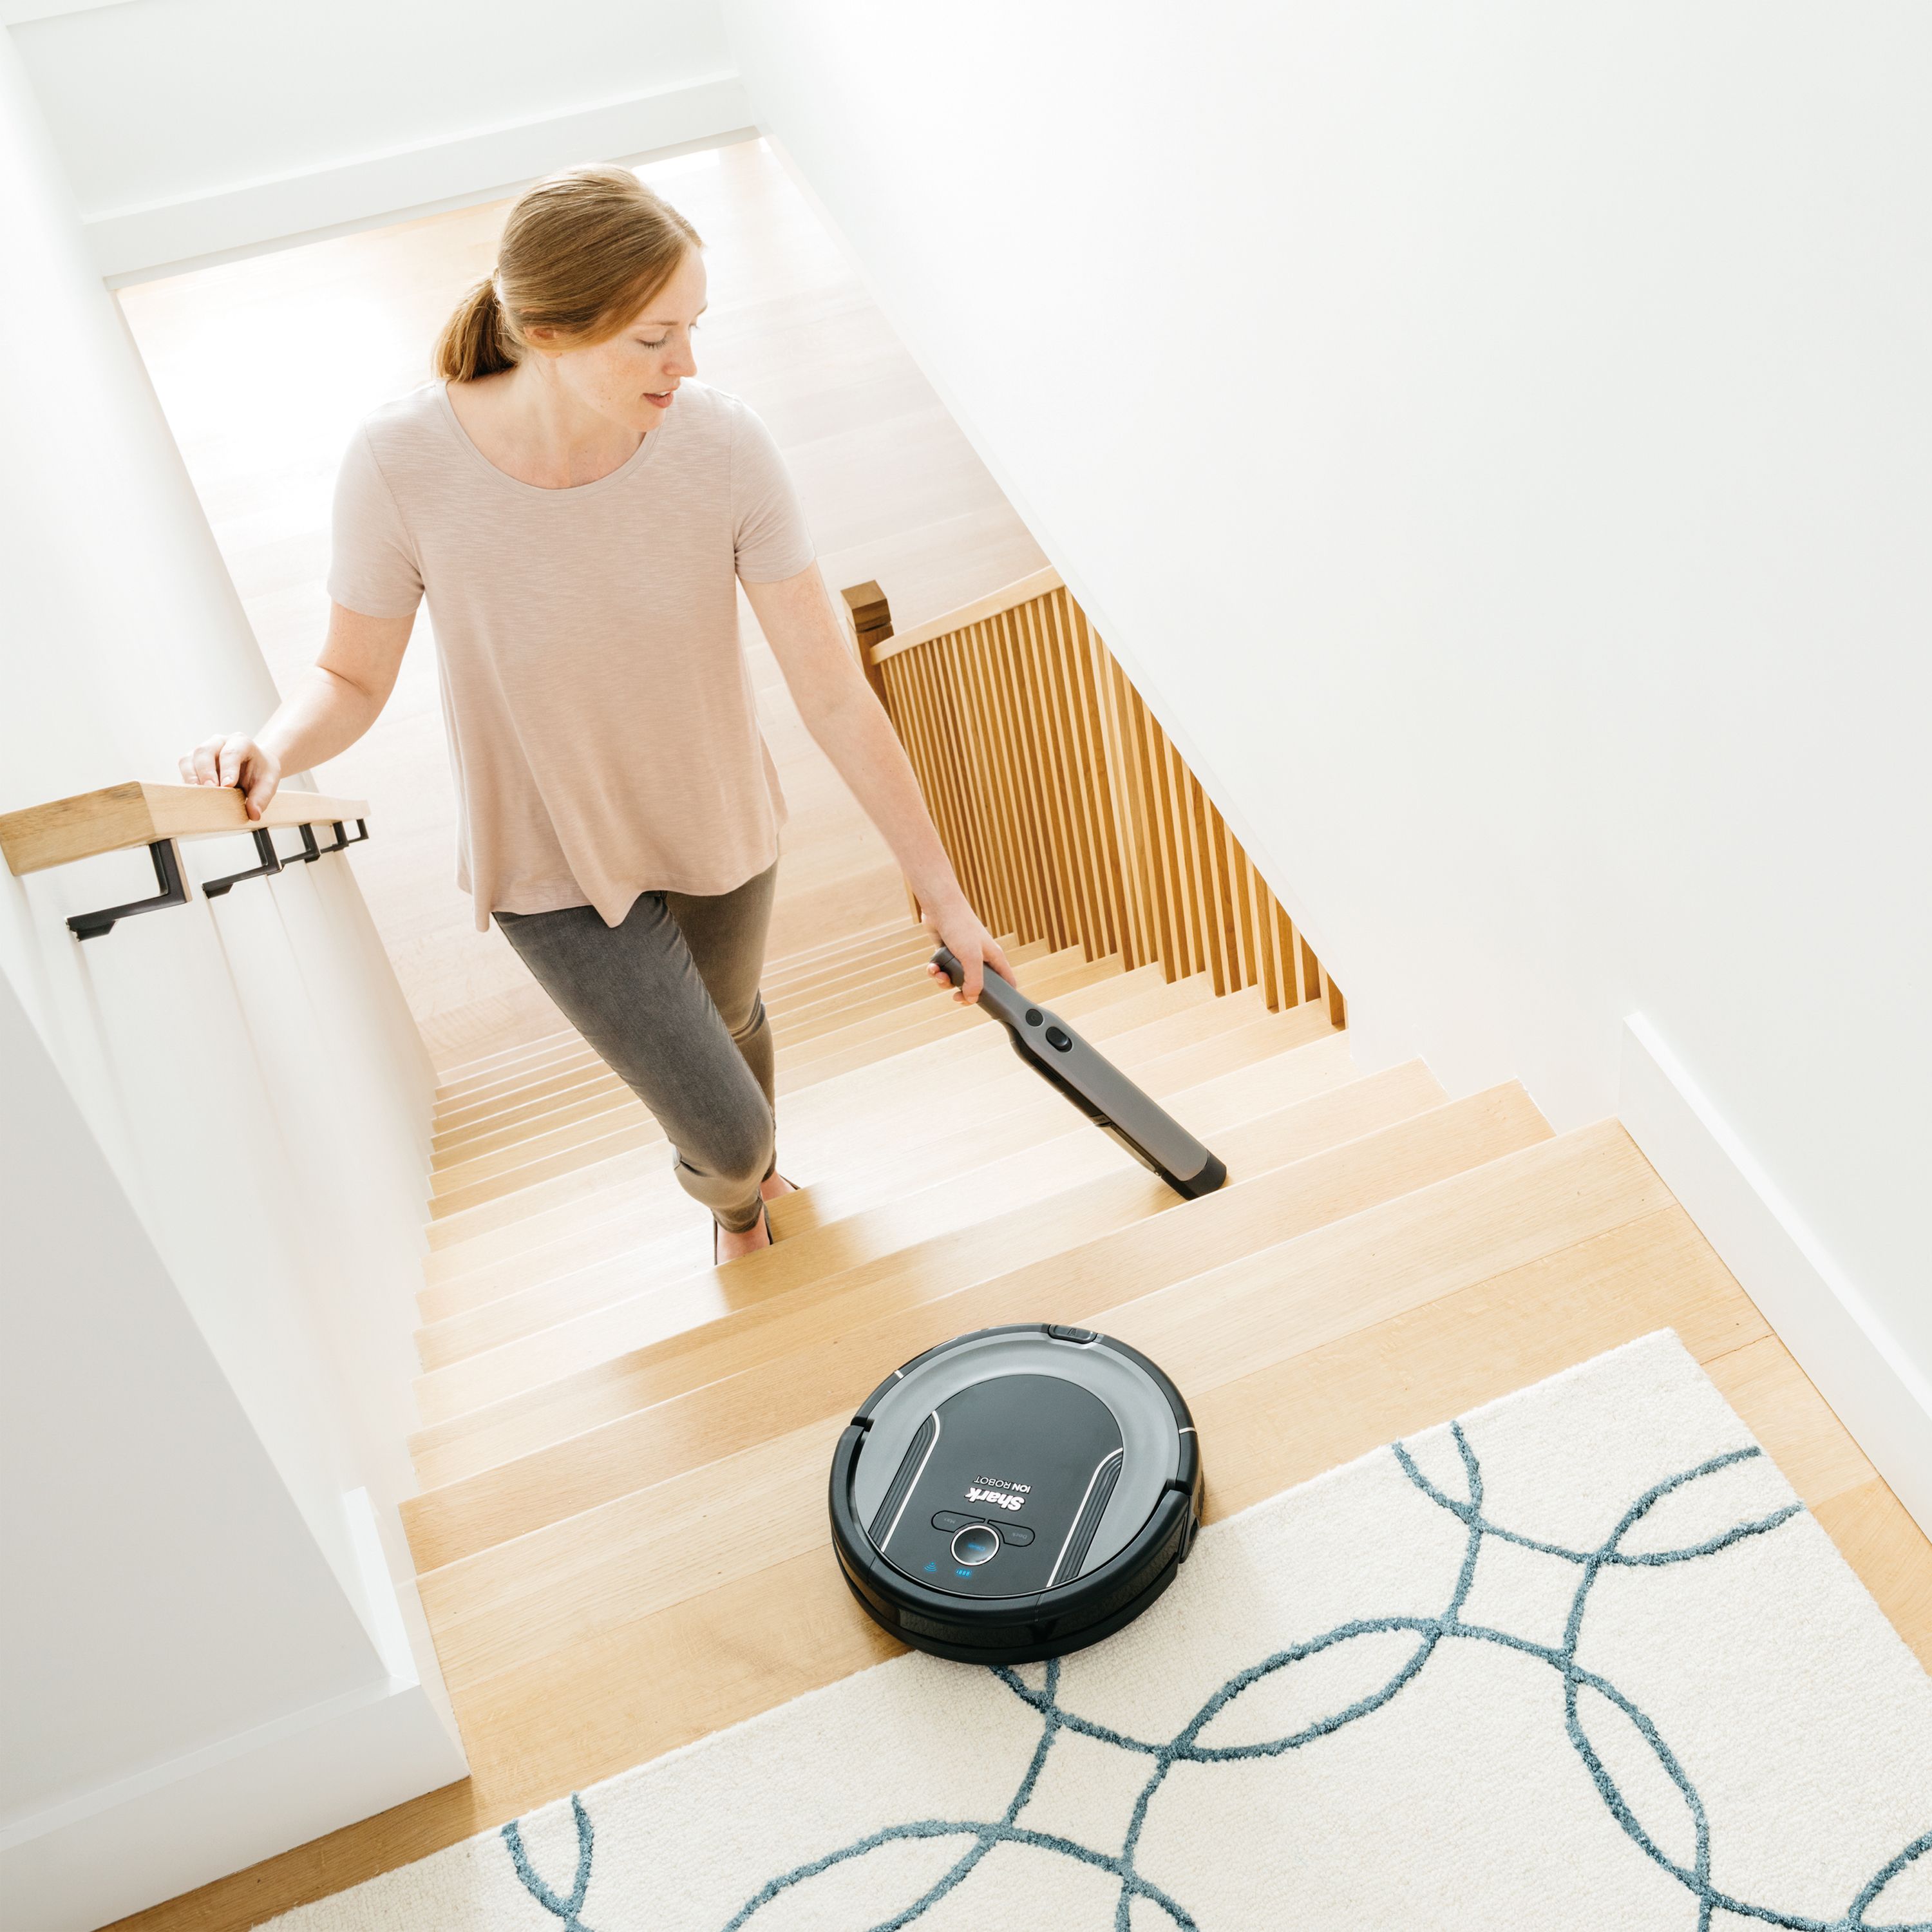 SHARK ION Robot Vacuum Cleaning System with Detachable Hand Vacuum, S86 with Wi-Fi - RV850WV - image 4 of 10